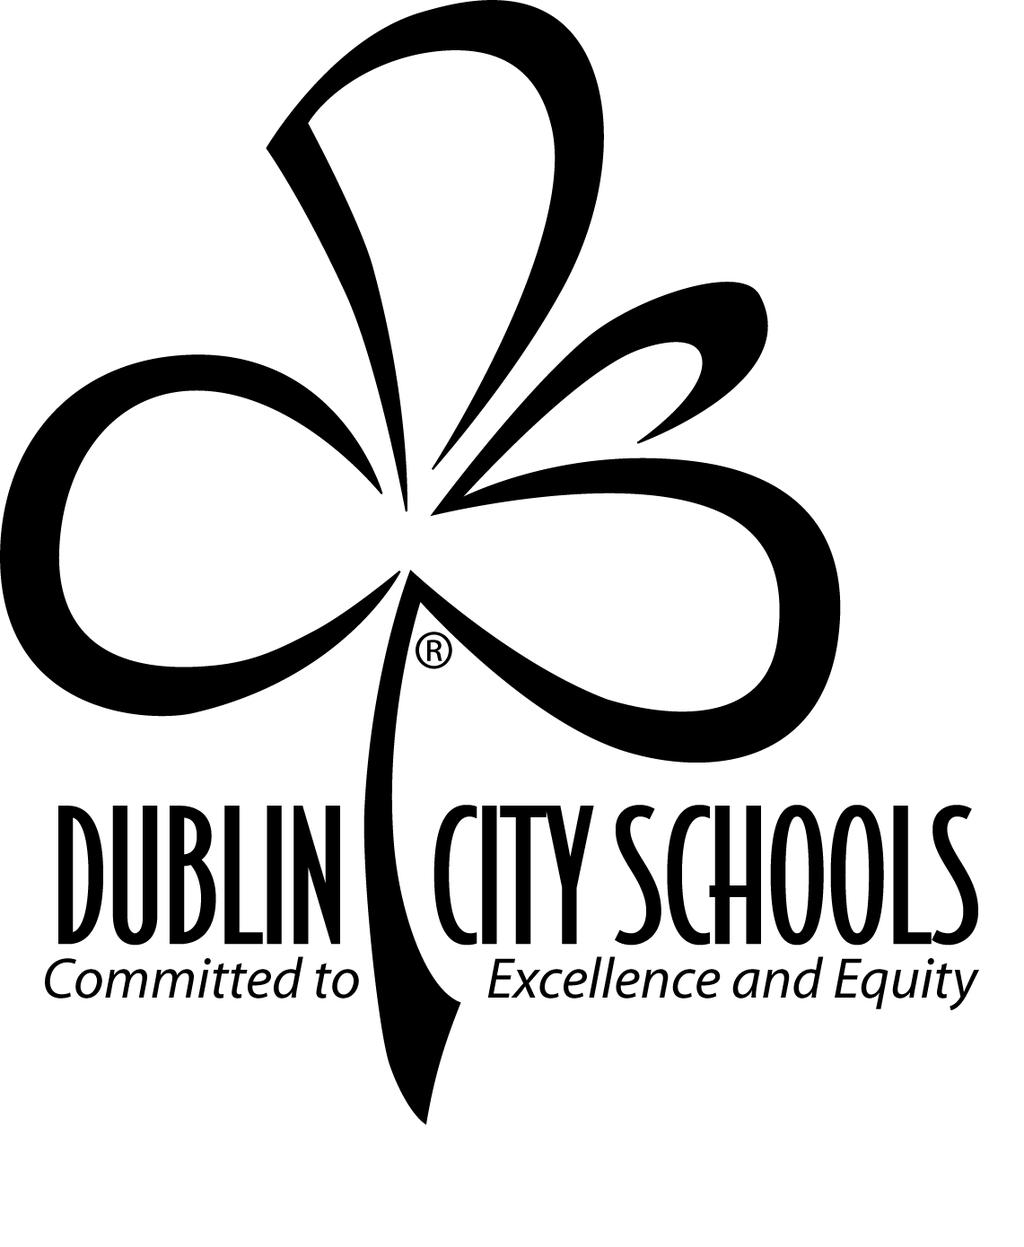 Philosophy The Dublin City Schools Language Arts curriculum is designed to set clear and consistent expectations and standards through an integrated model of literacy in order to help support